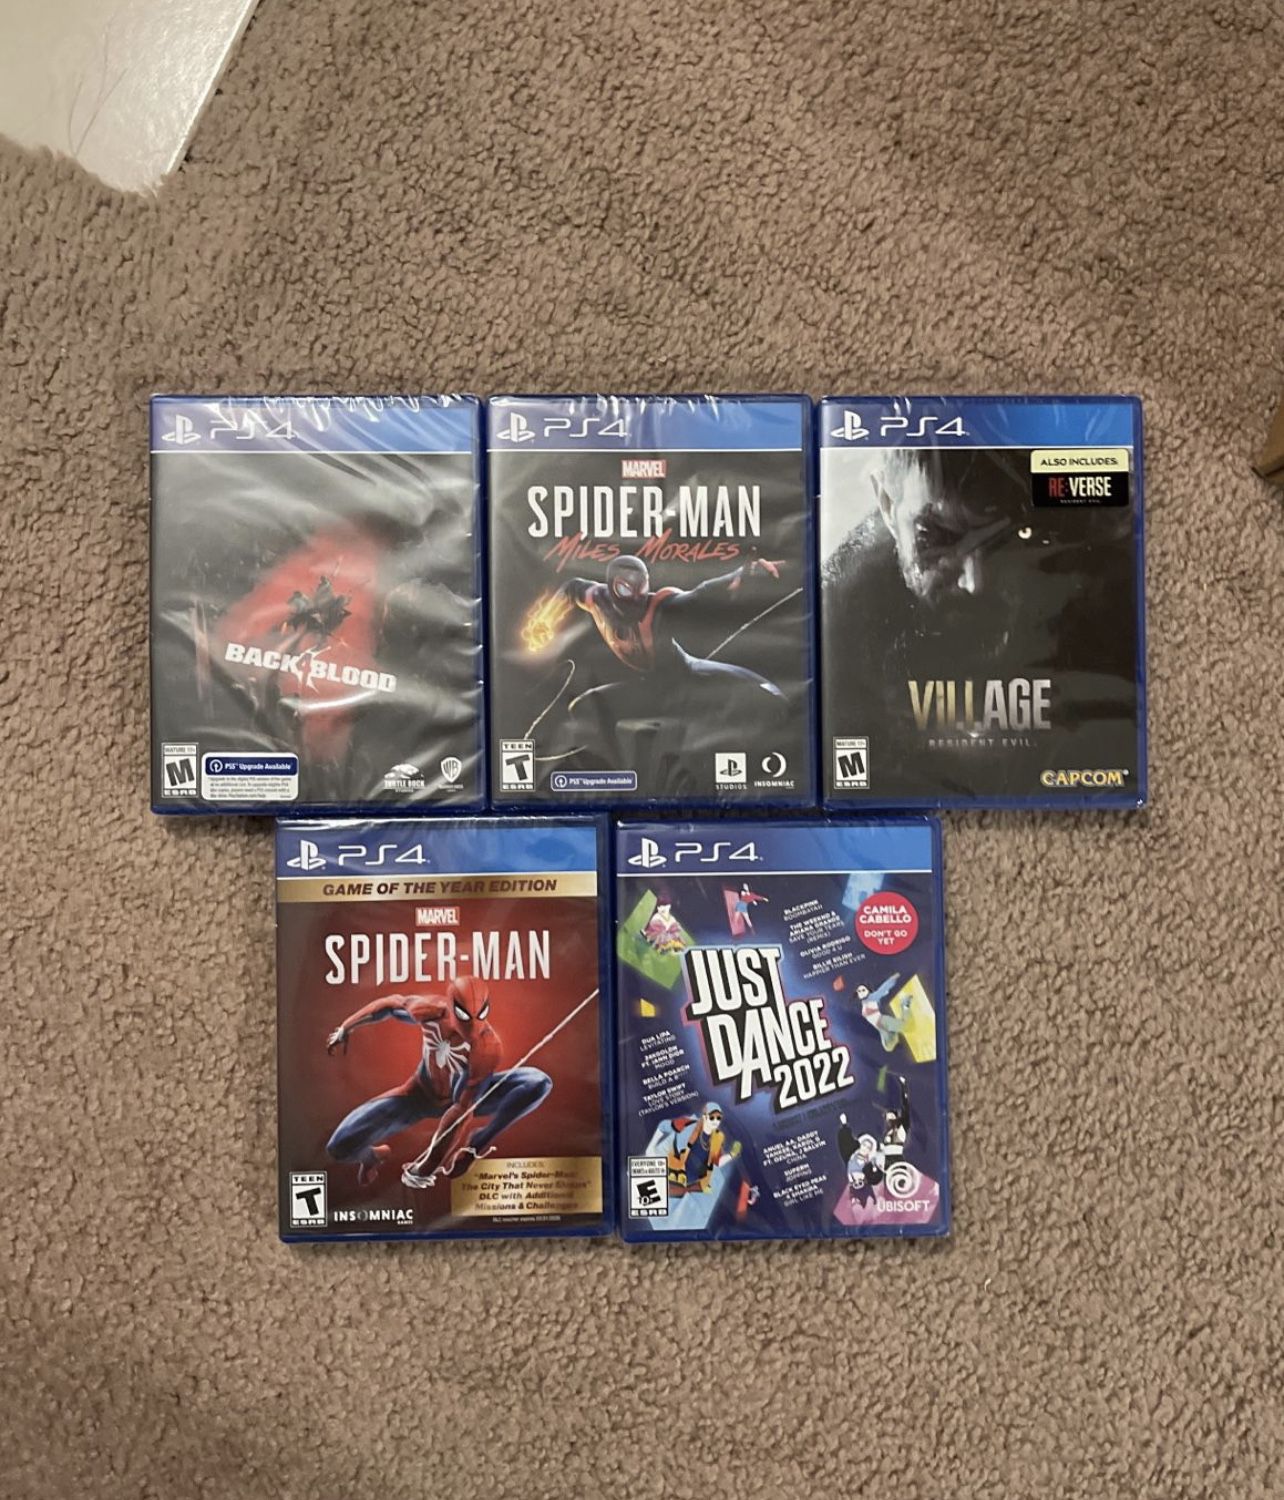 Playstation 4 PS4 Spiderman Miles morales Marvel Spider-man Game Of The Year Edition Resident Evil Village Just Dance 2022 Back Blood - Price for in Las Vegas, NV - OfferUp